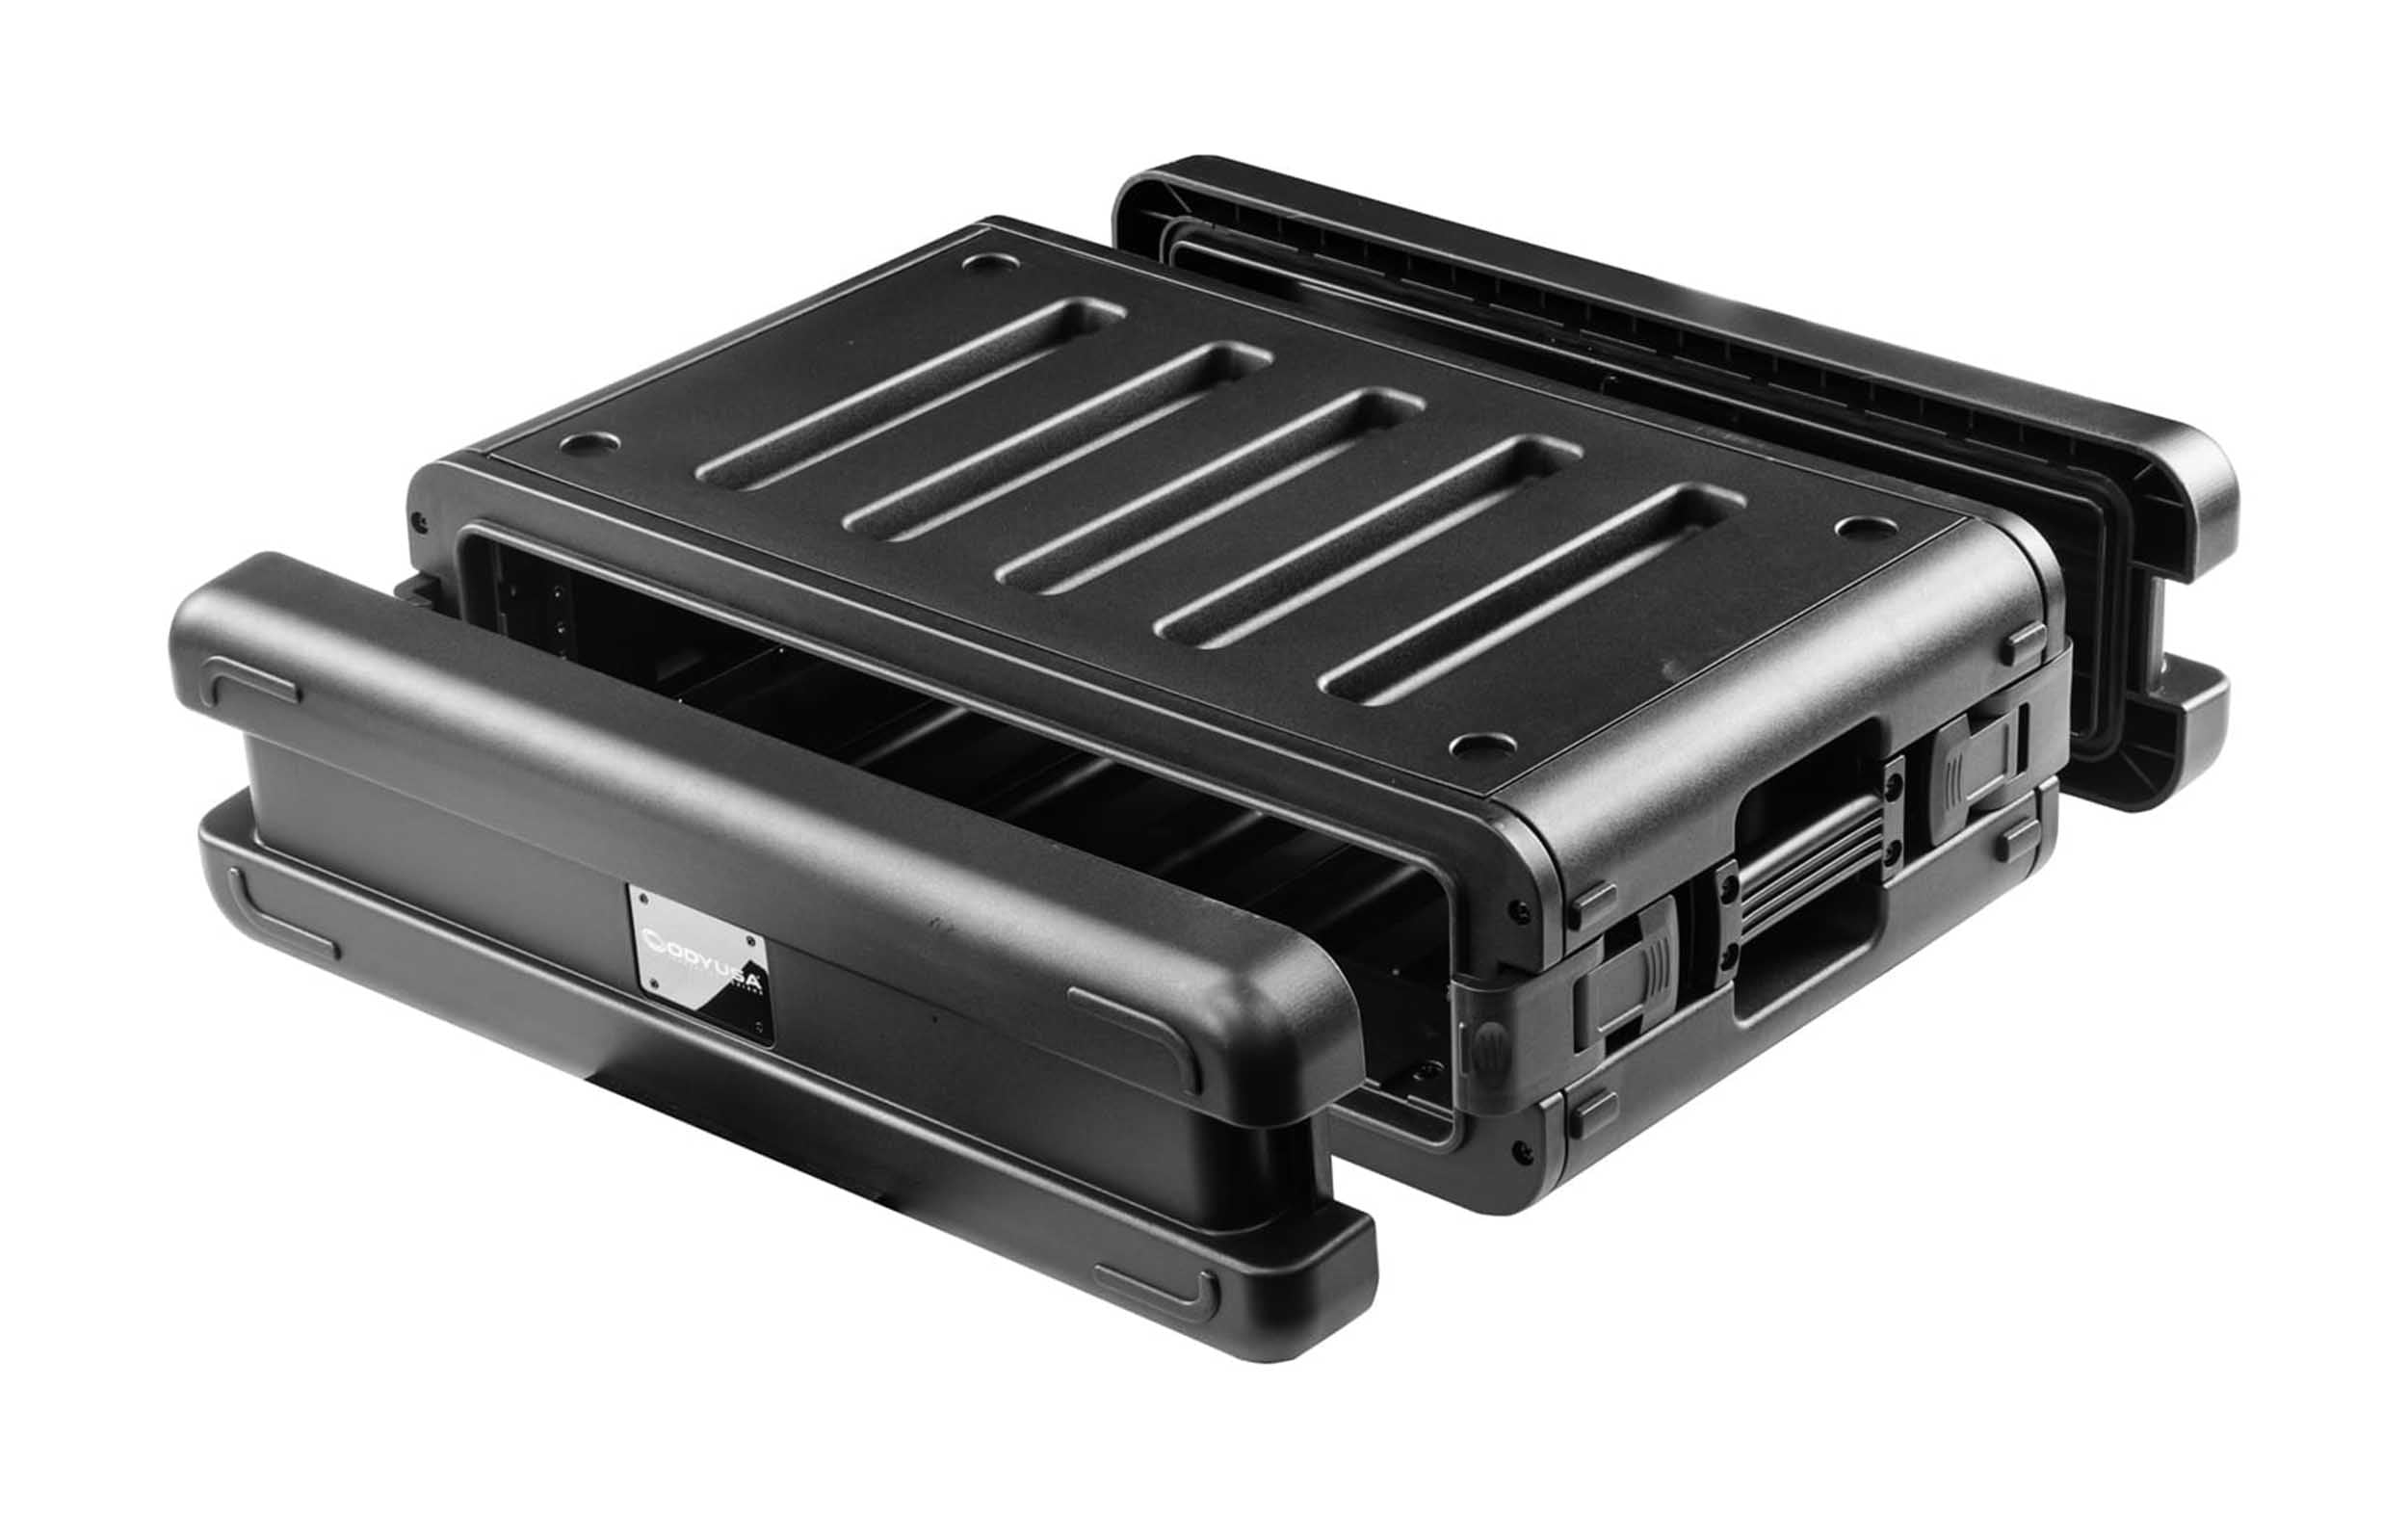 Odyssey VR2S, 10.5-Inch Rail-to-Rail Watertight Dust-proof Injection-Molded 2U Rack Case Odyssey